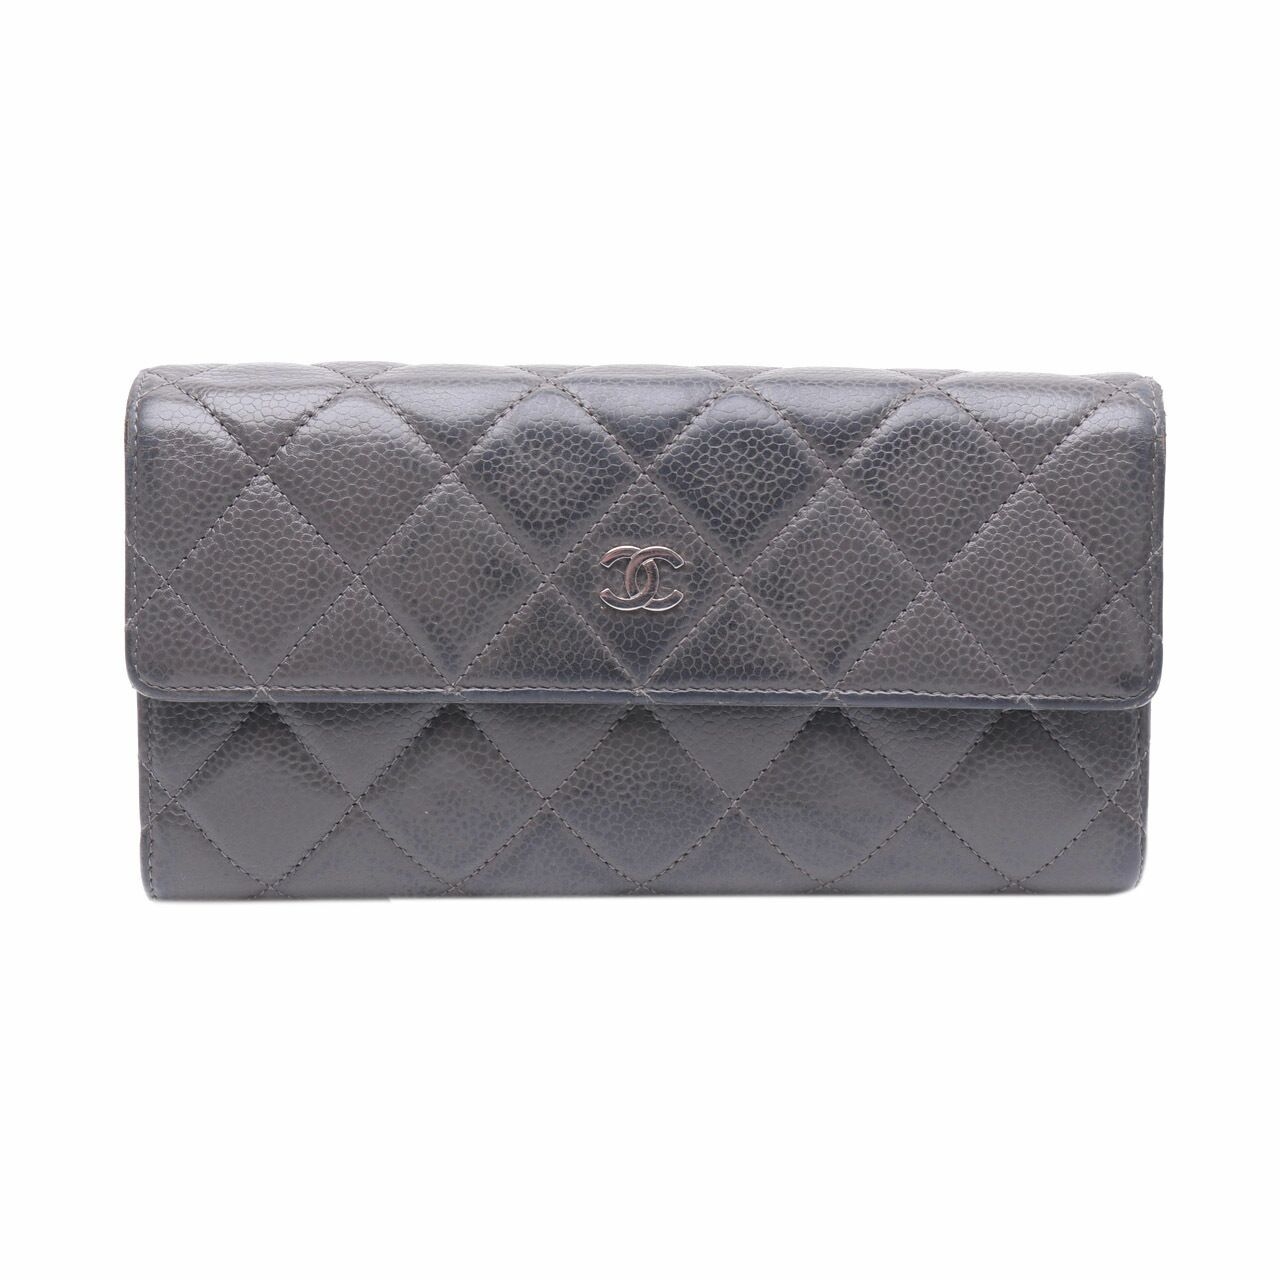 Chanel Grey Quilted Leather Flap Wallet